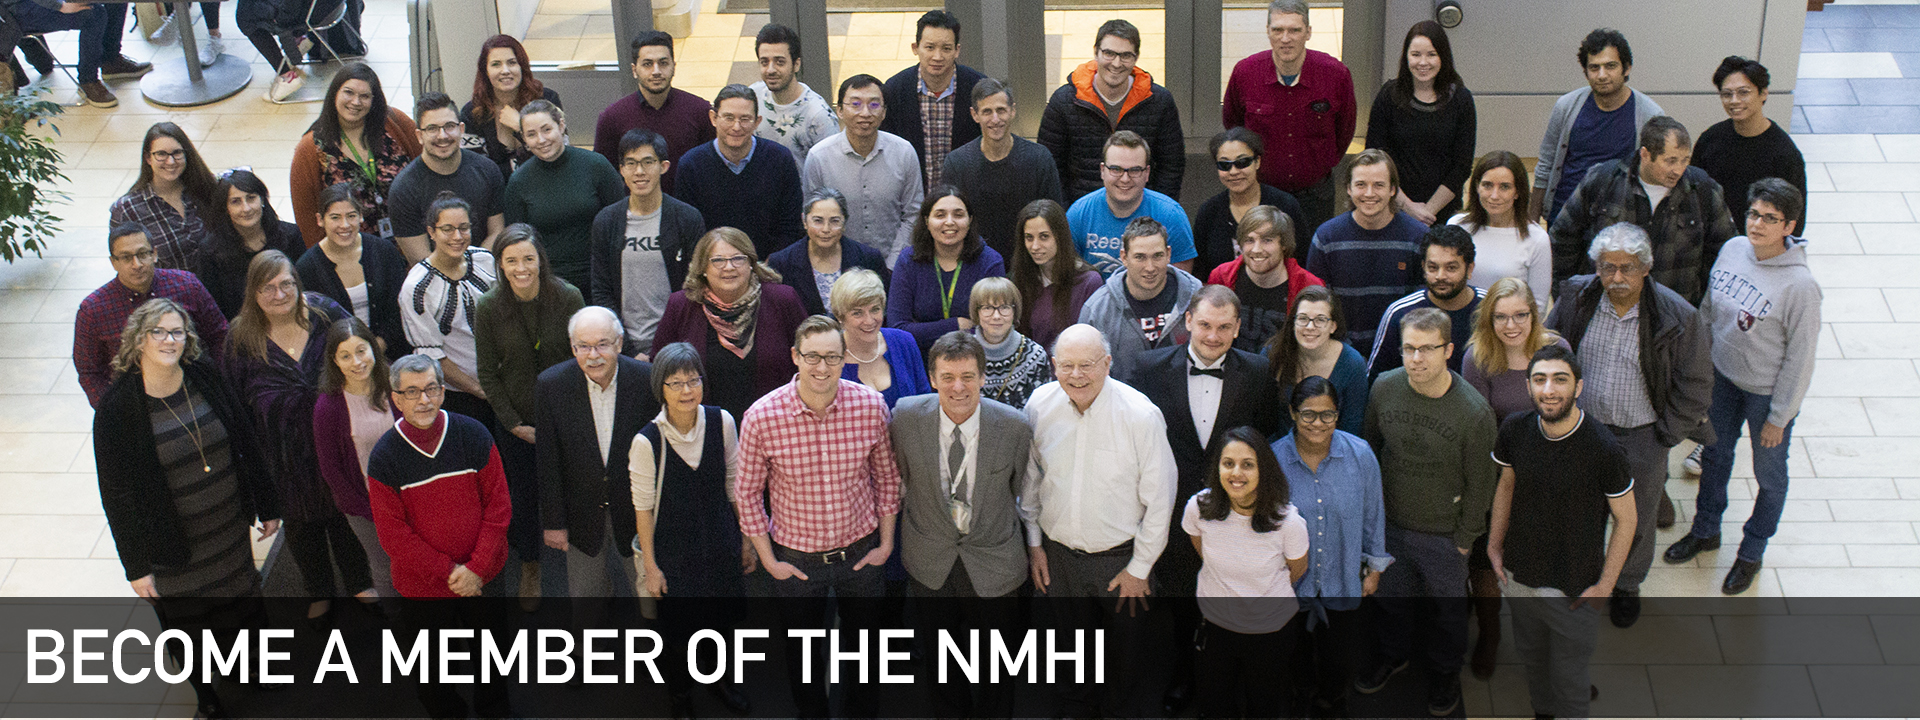 Picture of NMHI members